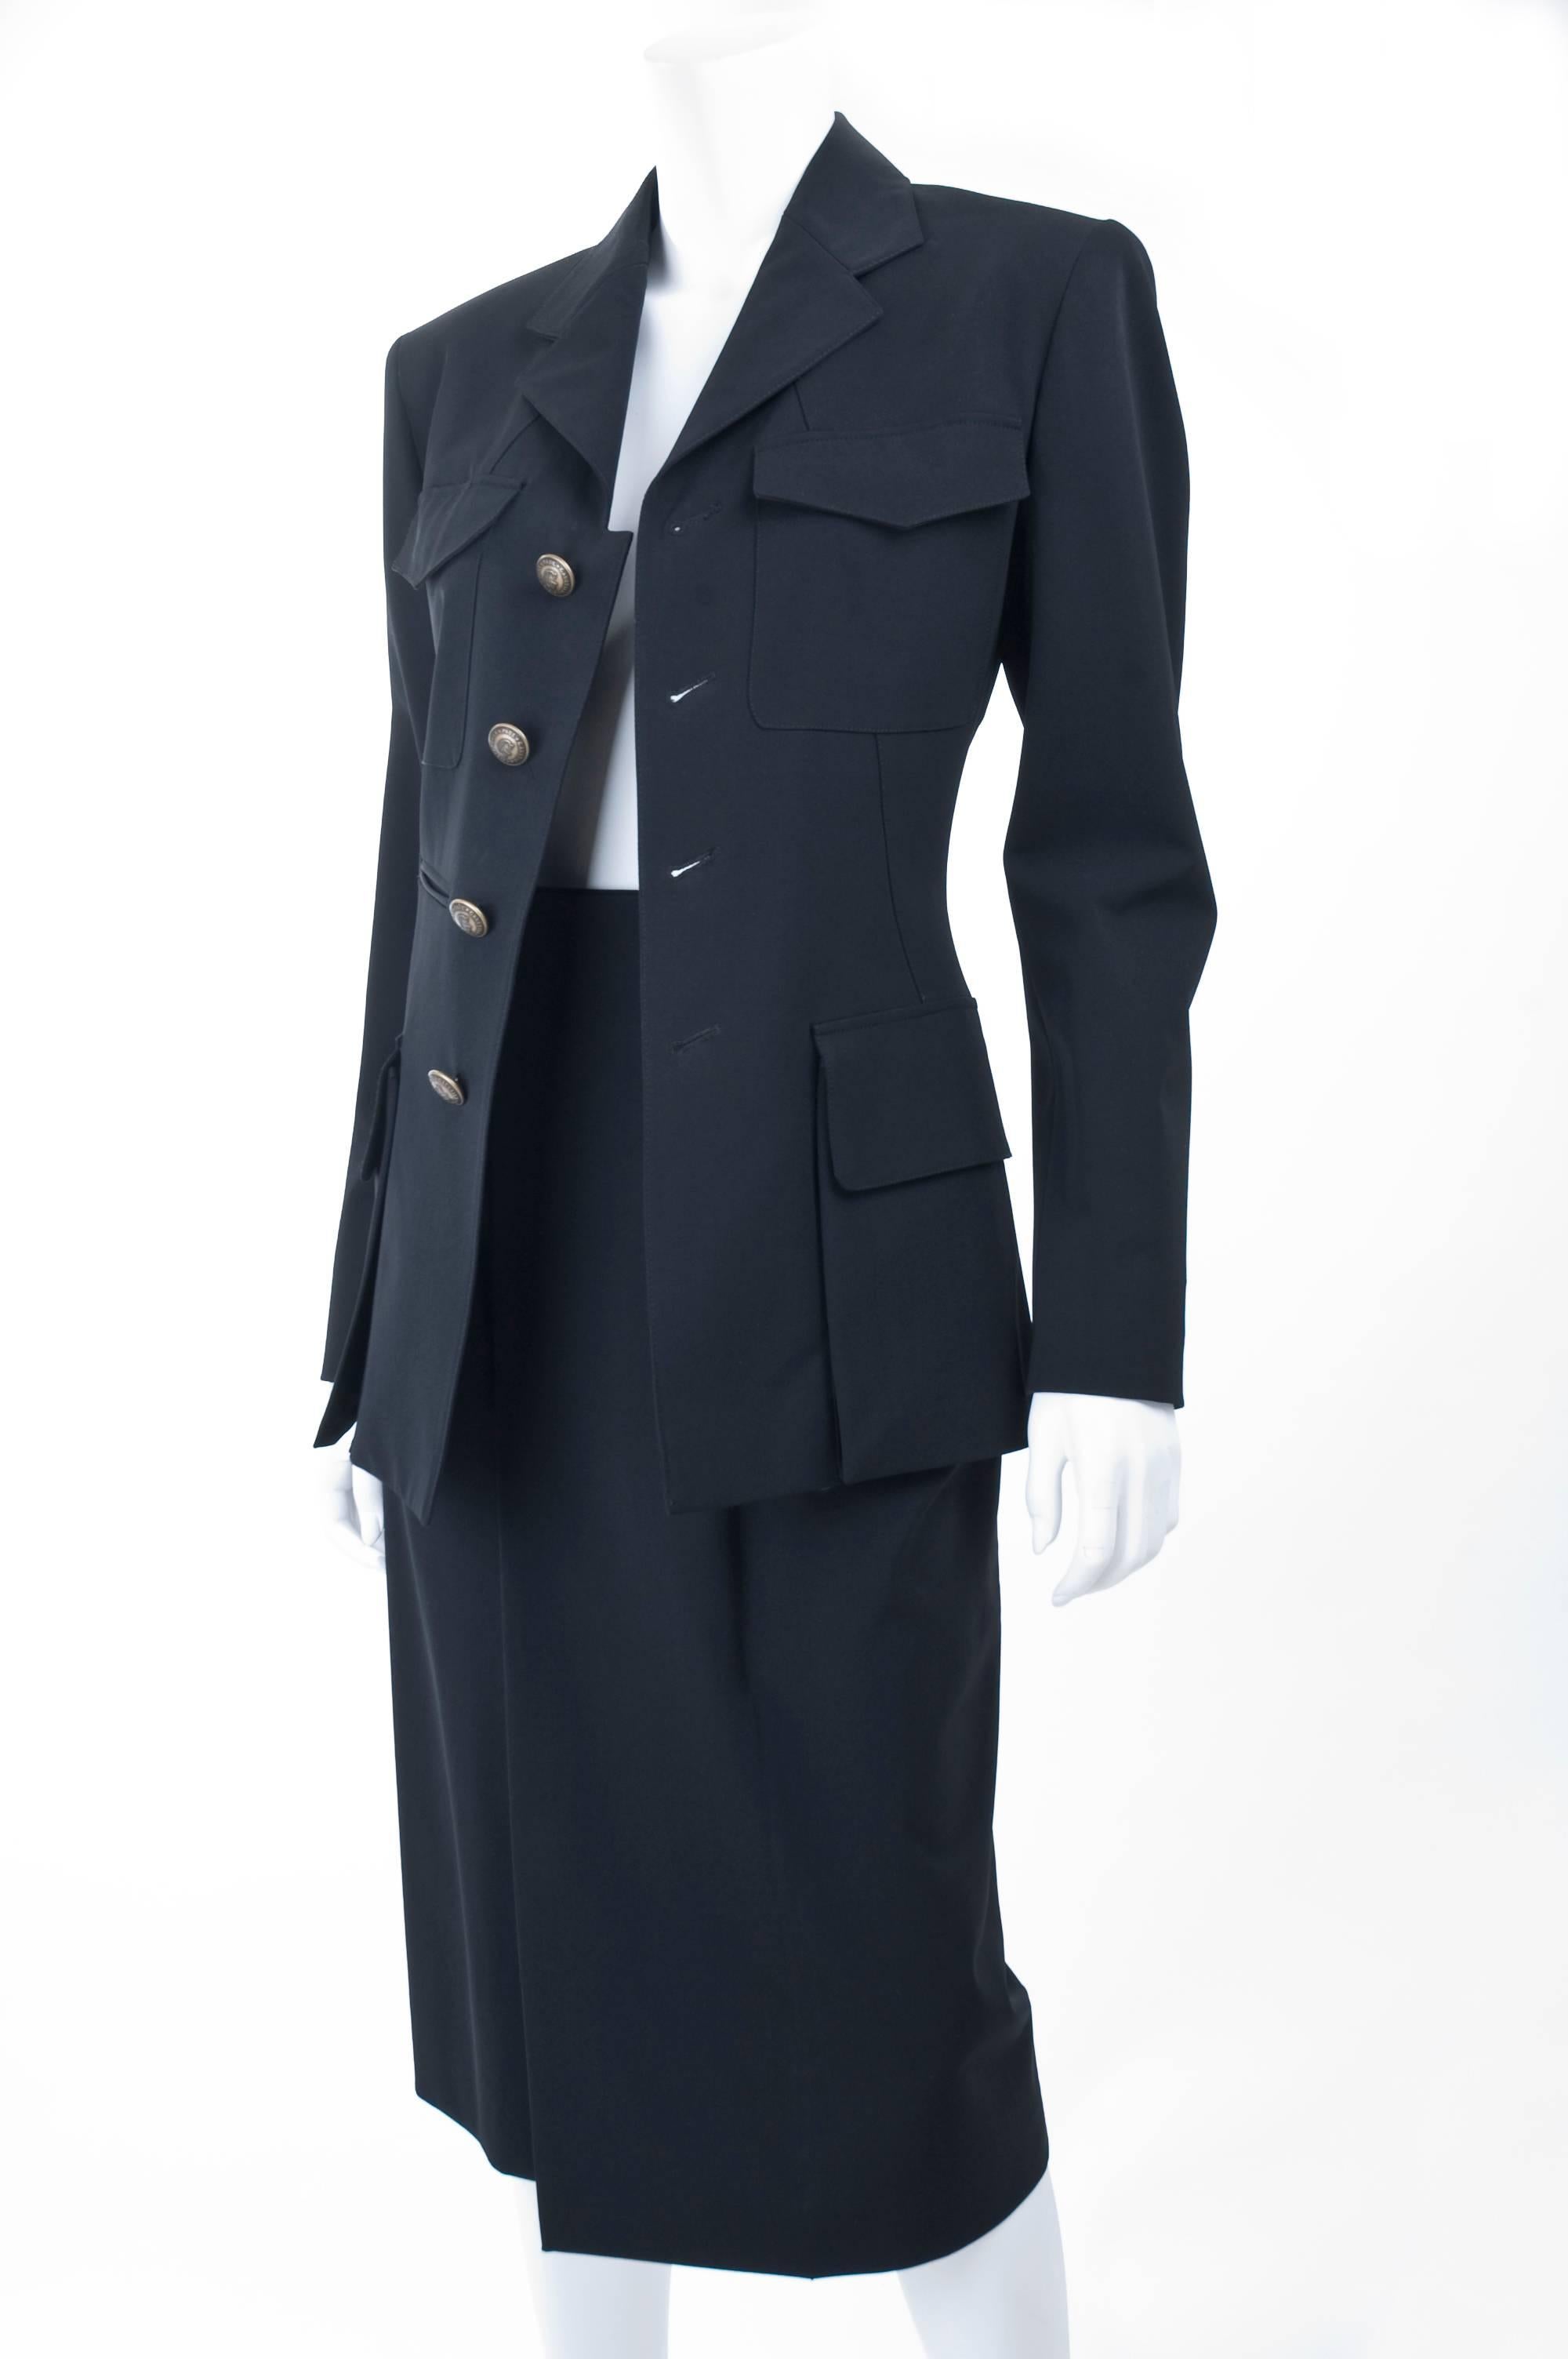 Women's From 1993/94 Jean Paul Gaultier Black Skirt Suit with Belt For Sale